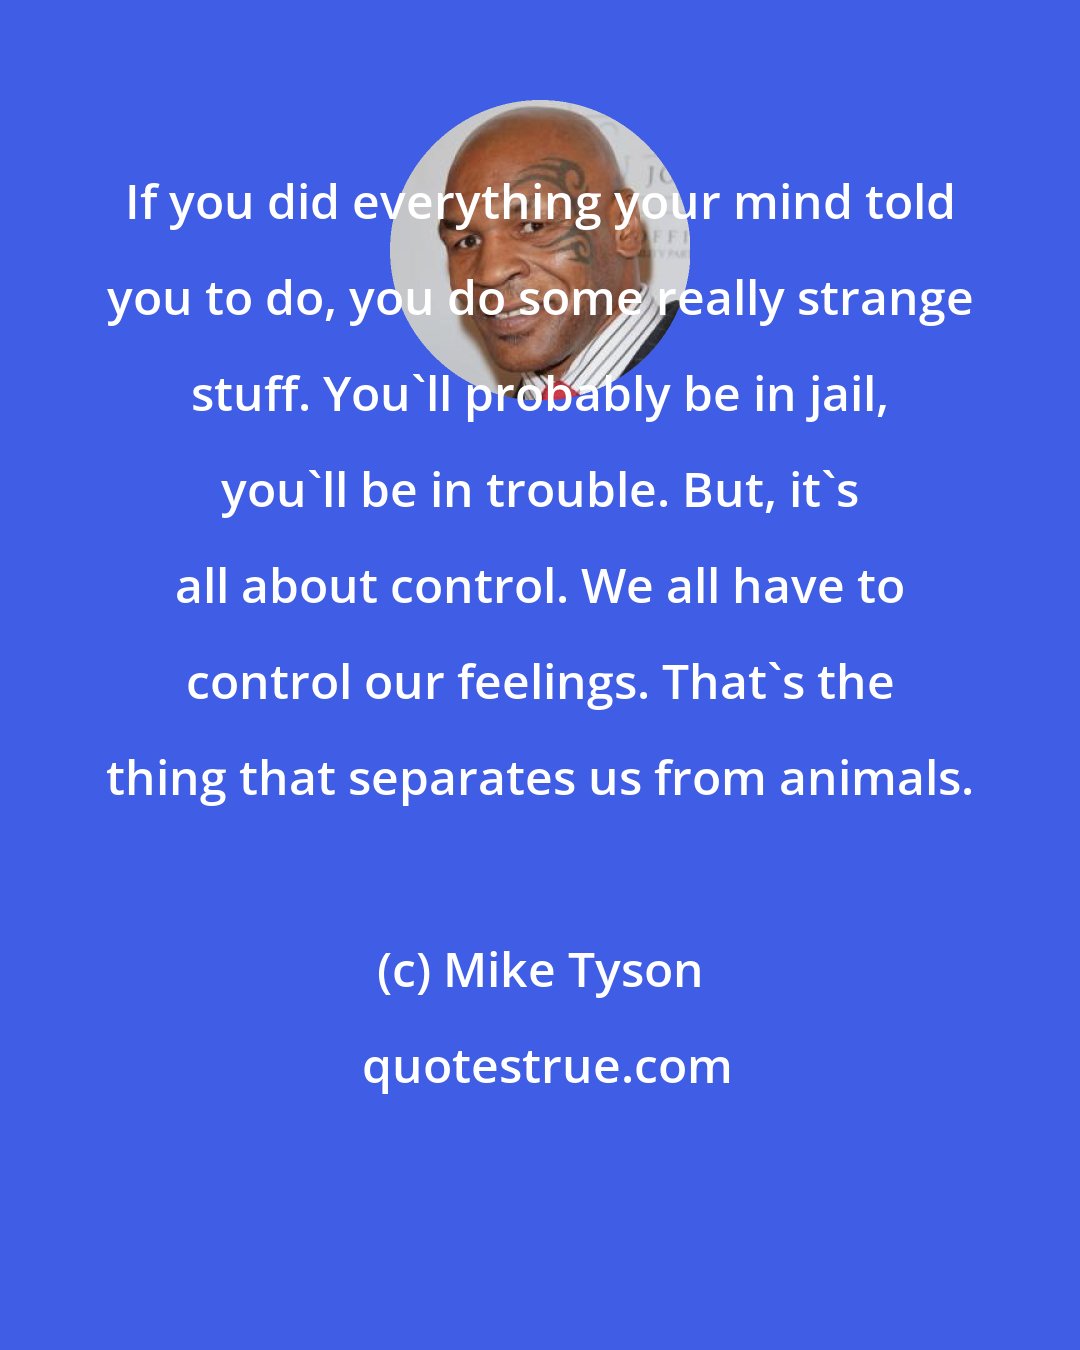 Mike Tyson: If you did everything your mind told you to do, you do some really strange stuff. You'll probably be in jail, you'll be in trouble. But, it's all about control. We all have to control our feelings. That's the thing that separates us from animals.